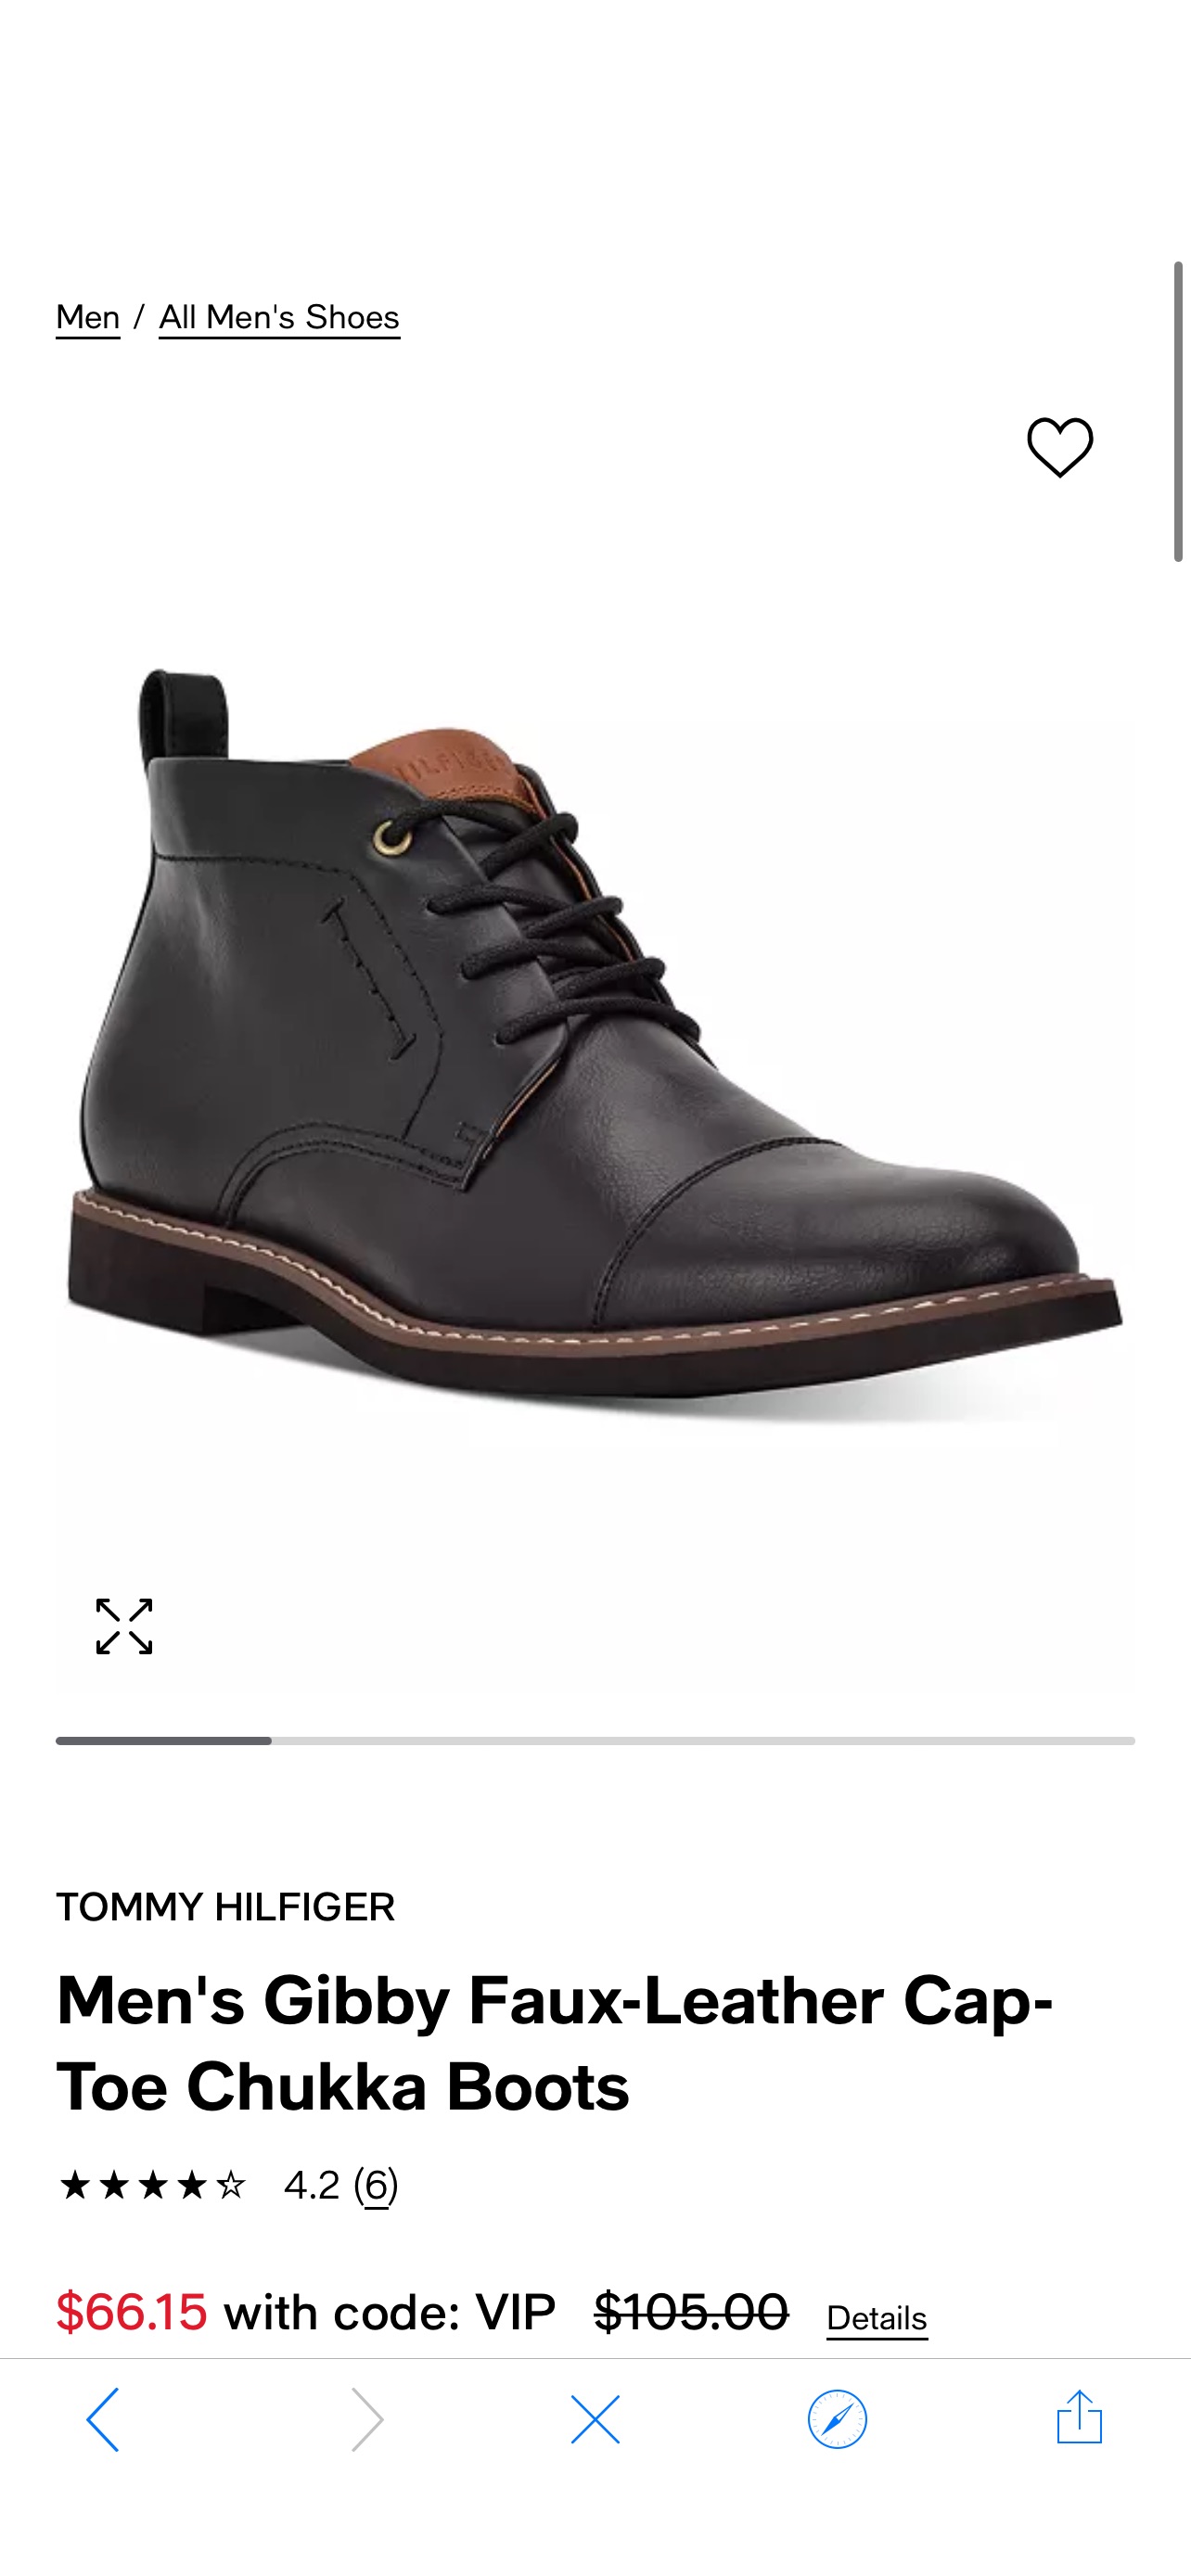 Tommy Hilfiger Men's Gibby Faux-Leather Cap-Toe Chukka Boots & Reviews - All Men's Shoes - Men - Macy's